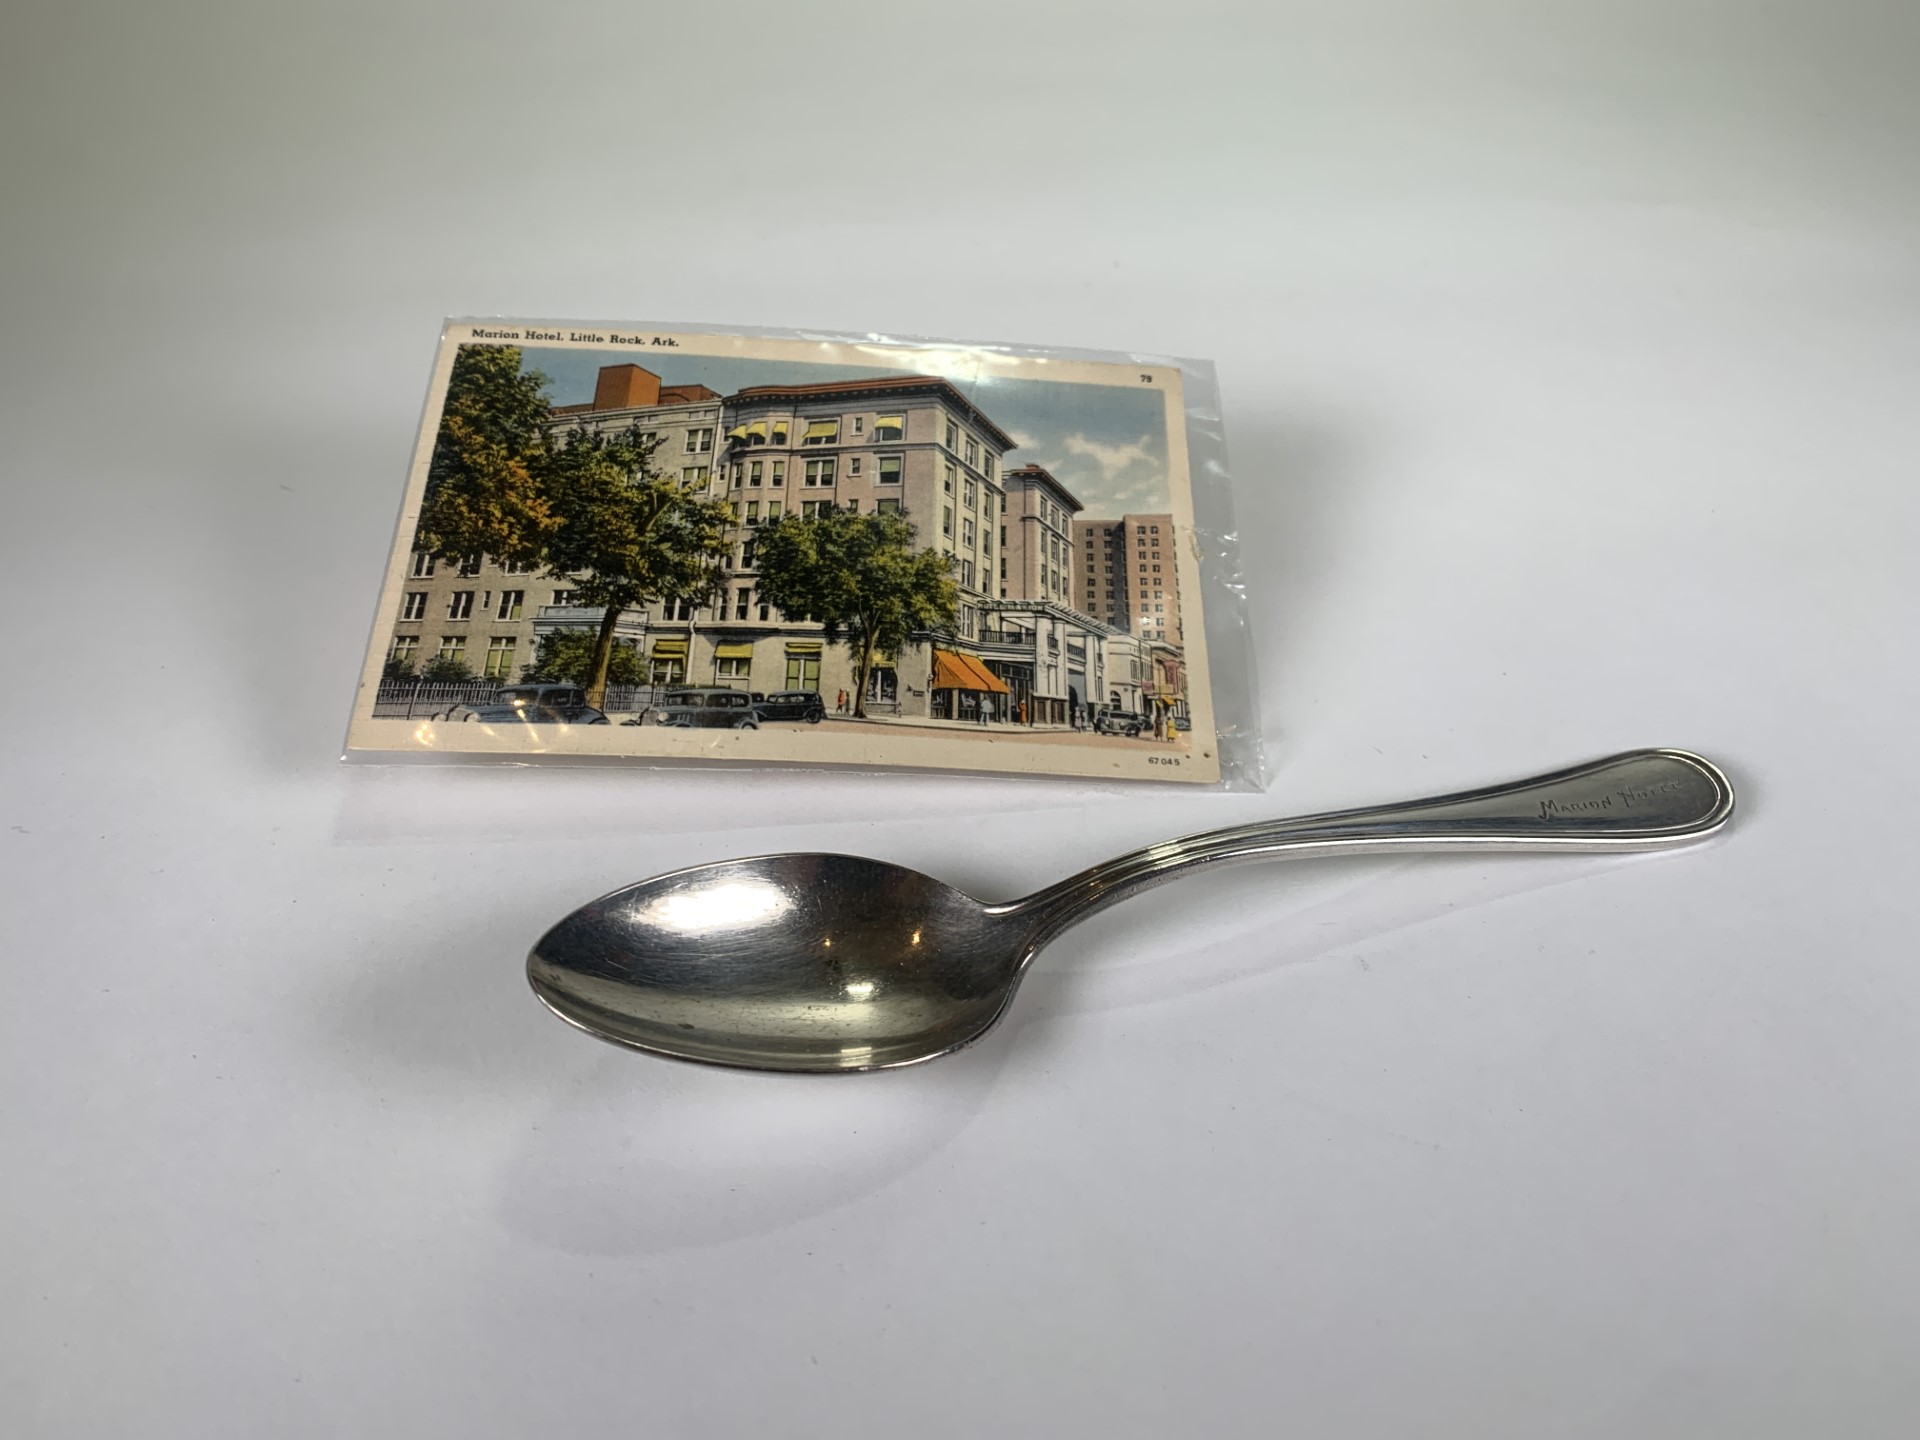 Photo of a small spoon laying on a white surface next to a postcard featuring a picture of building.